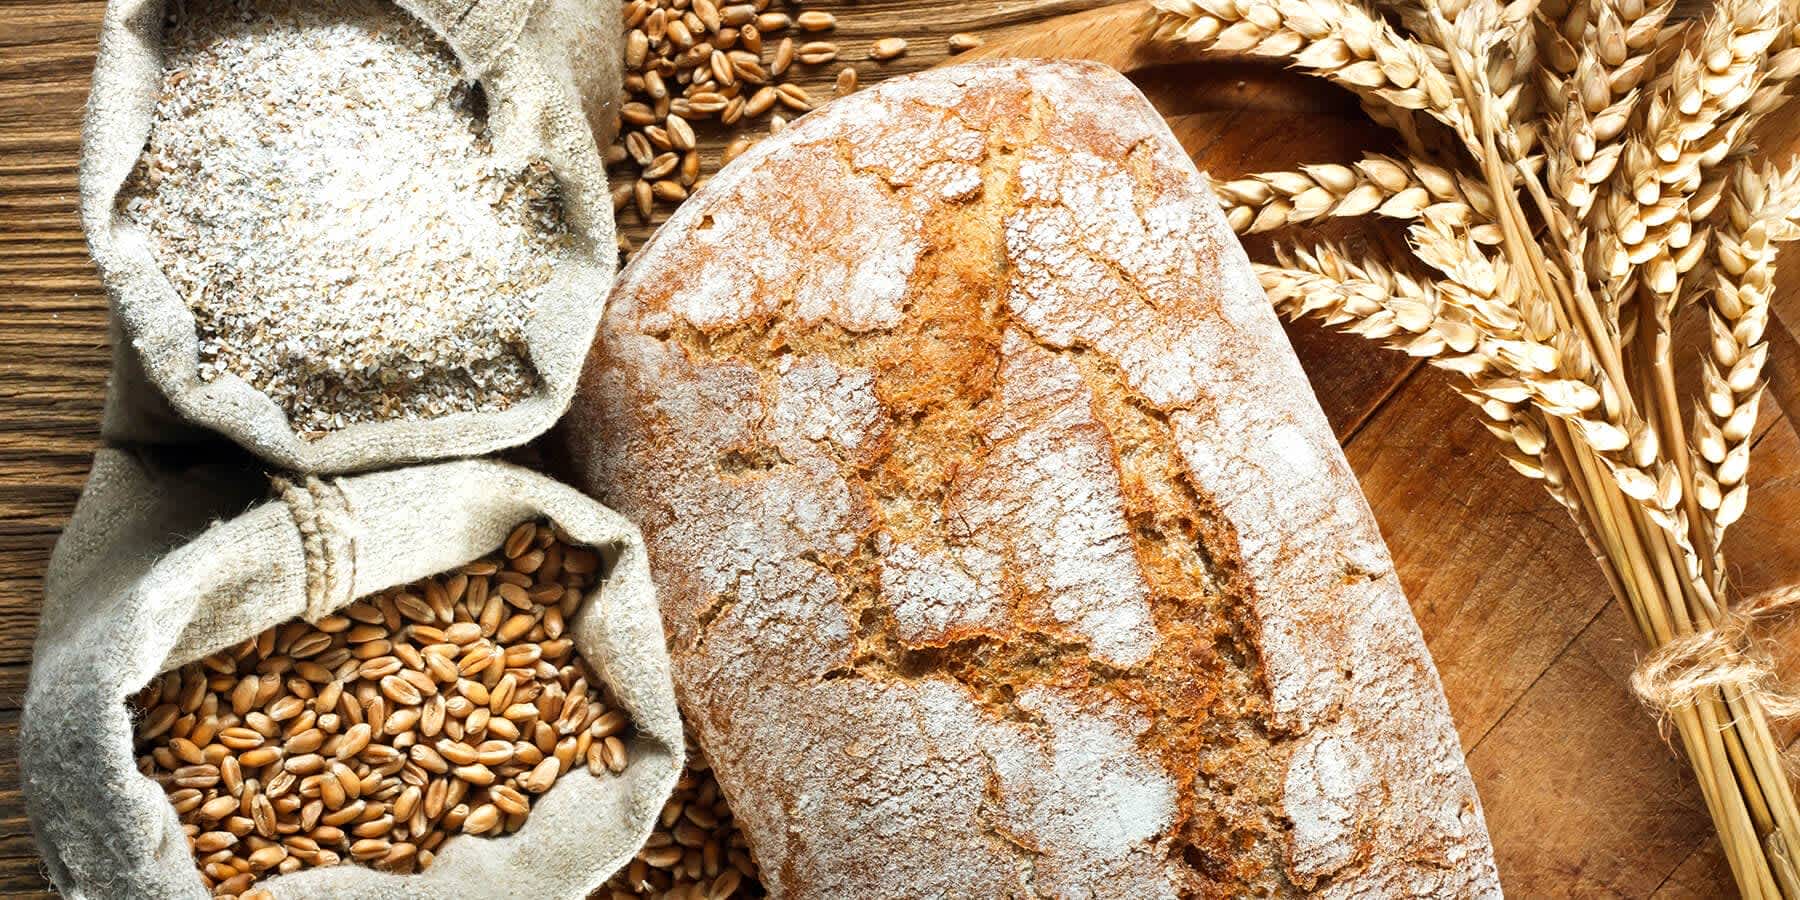 Bread and other wheat products with gluten that can cause inflammation